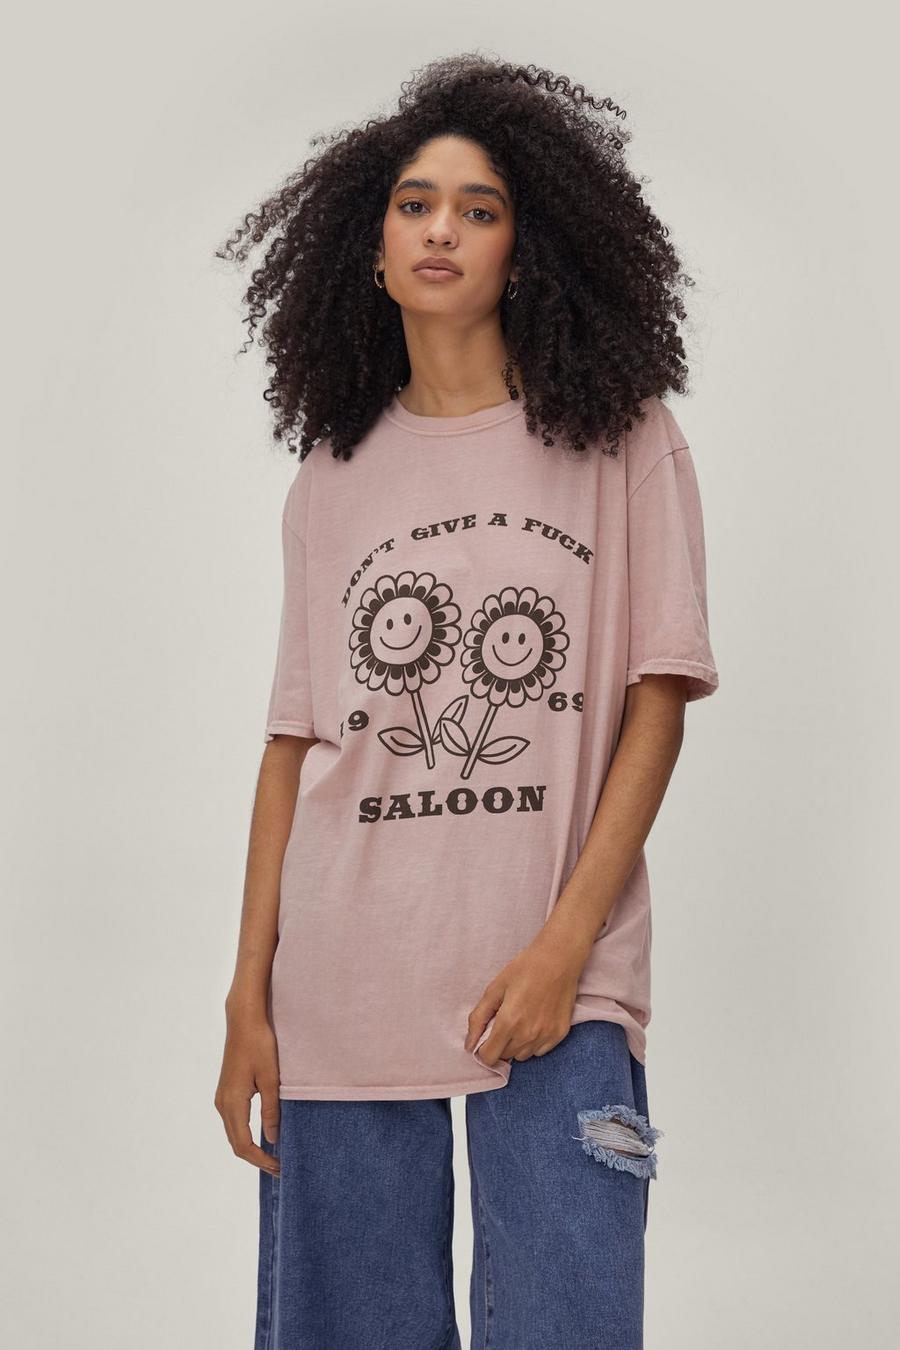 Don't Give A Fuck Saloon T-shirt